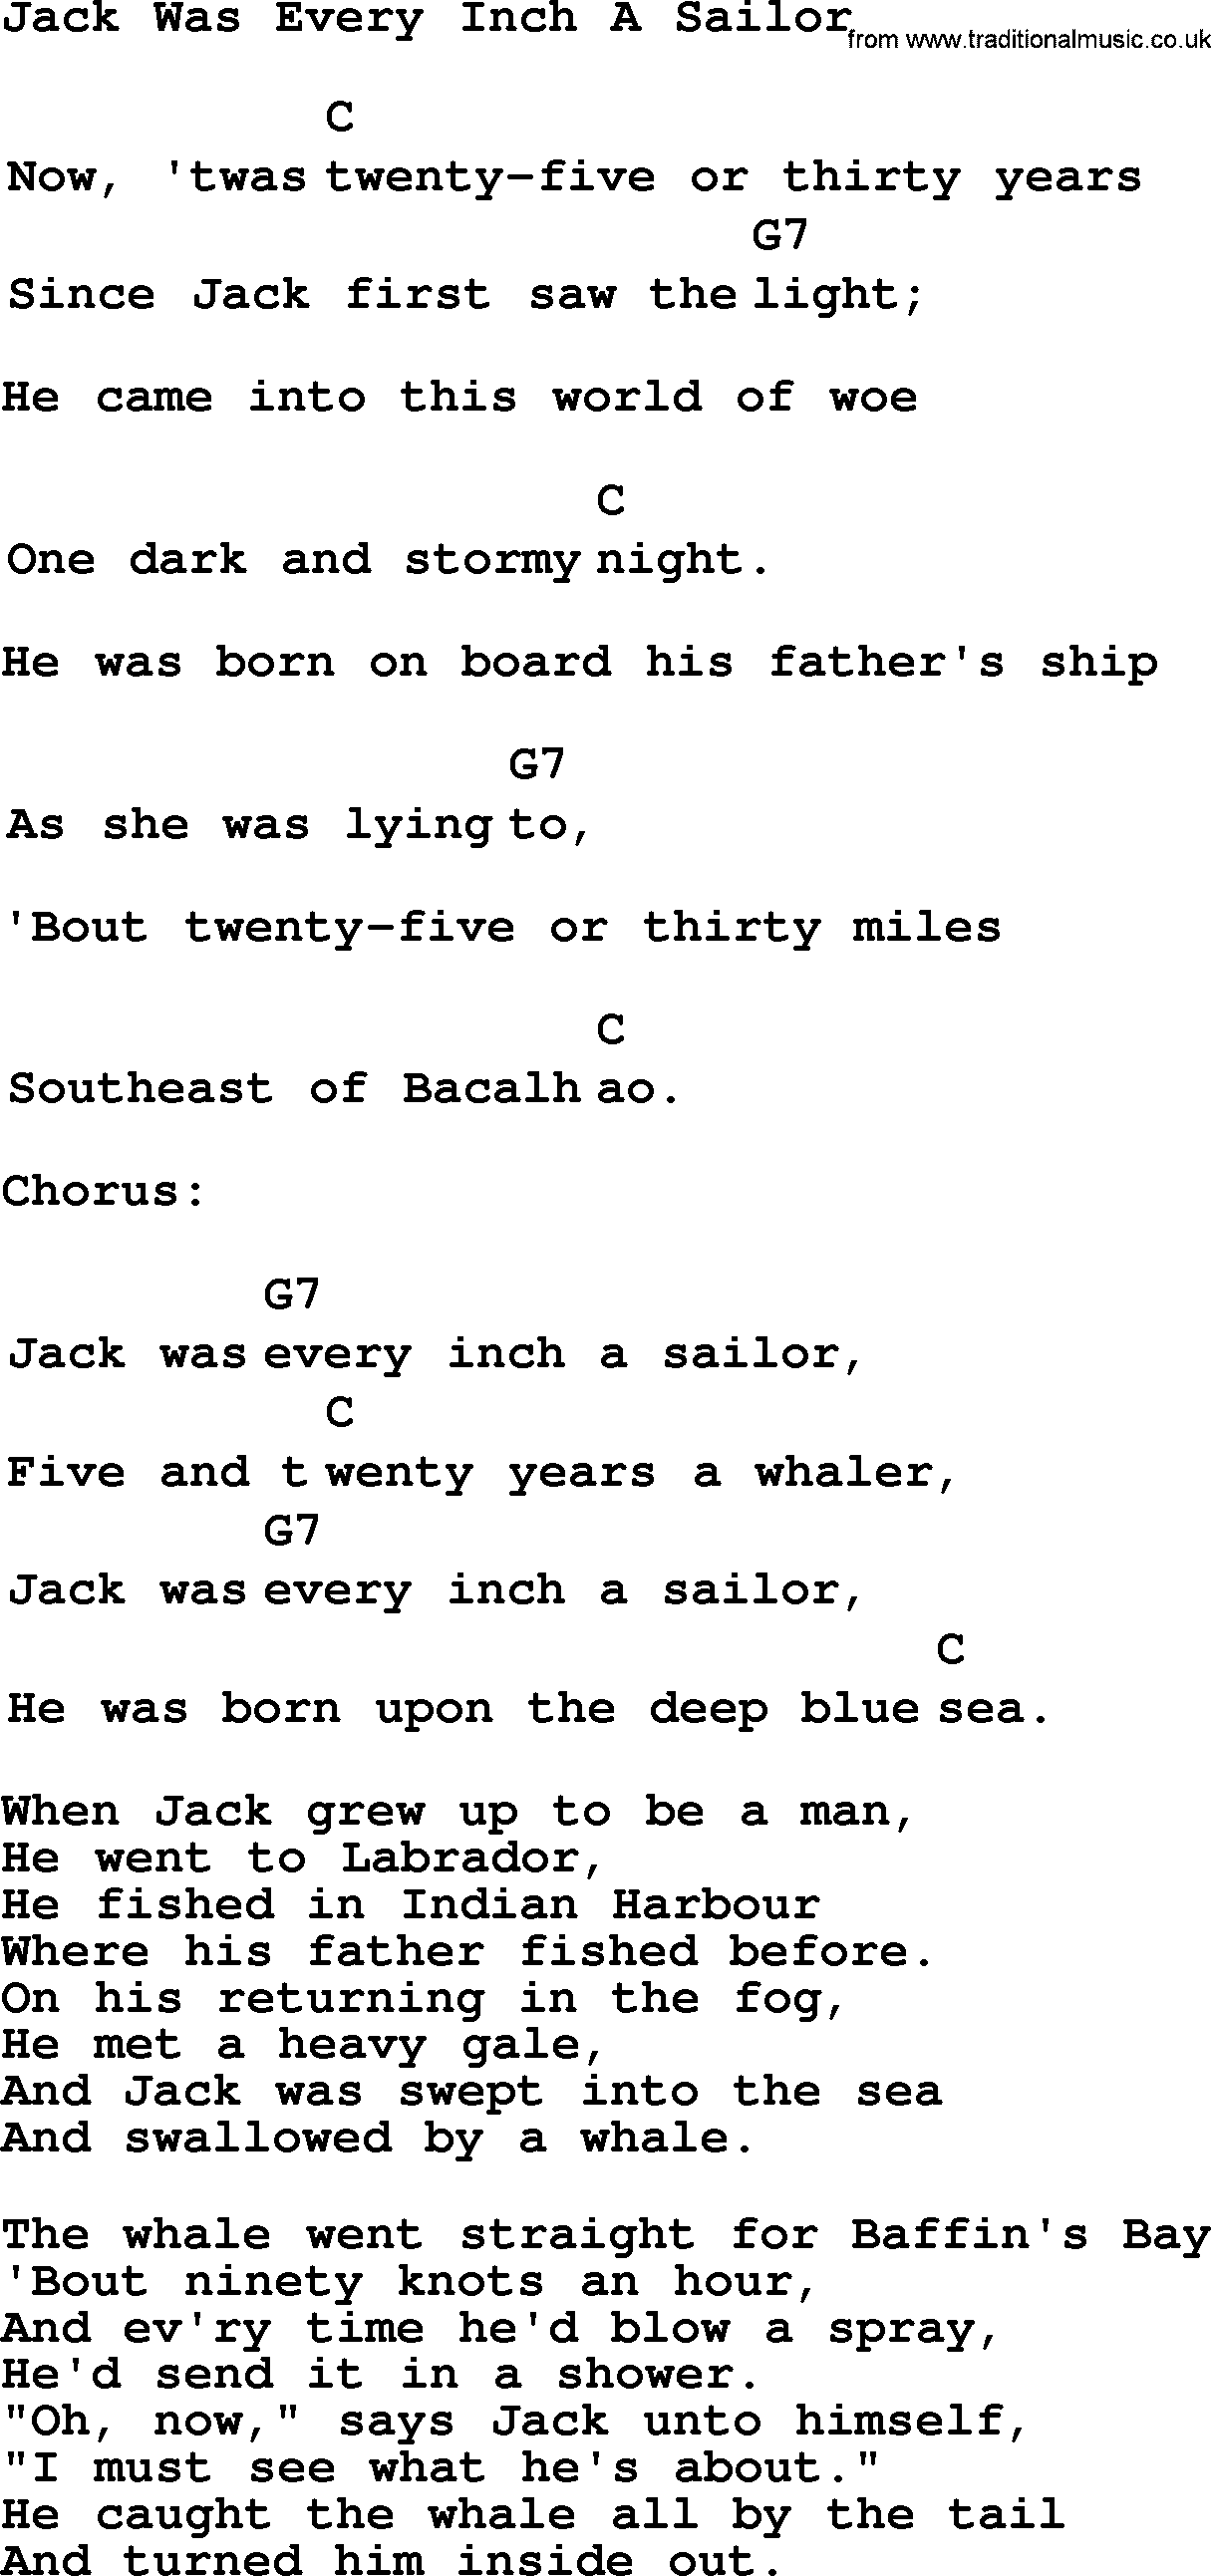 Top 1000 Most Popular Folk and Old-time Songs: Jack Was Every Inch A Sailor, lyrics and chords